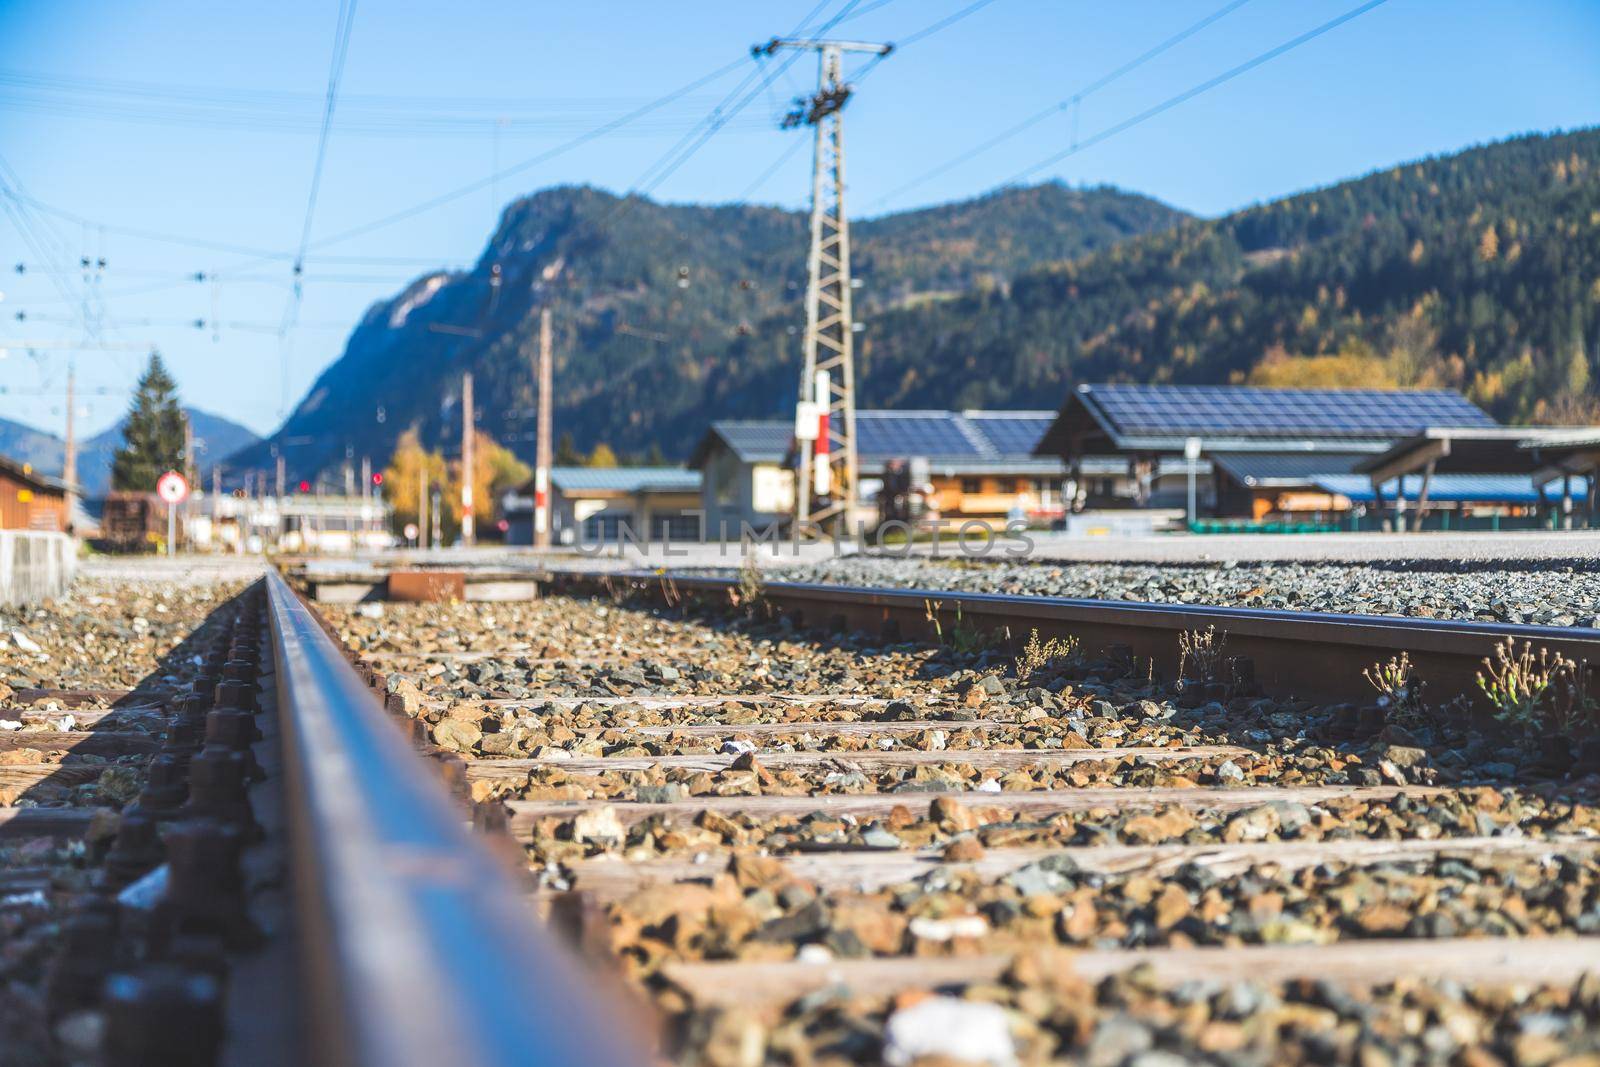 Sustainable traveling by train: Rail track and colorful, idyllic landscape in fall. by Daxenbichler